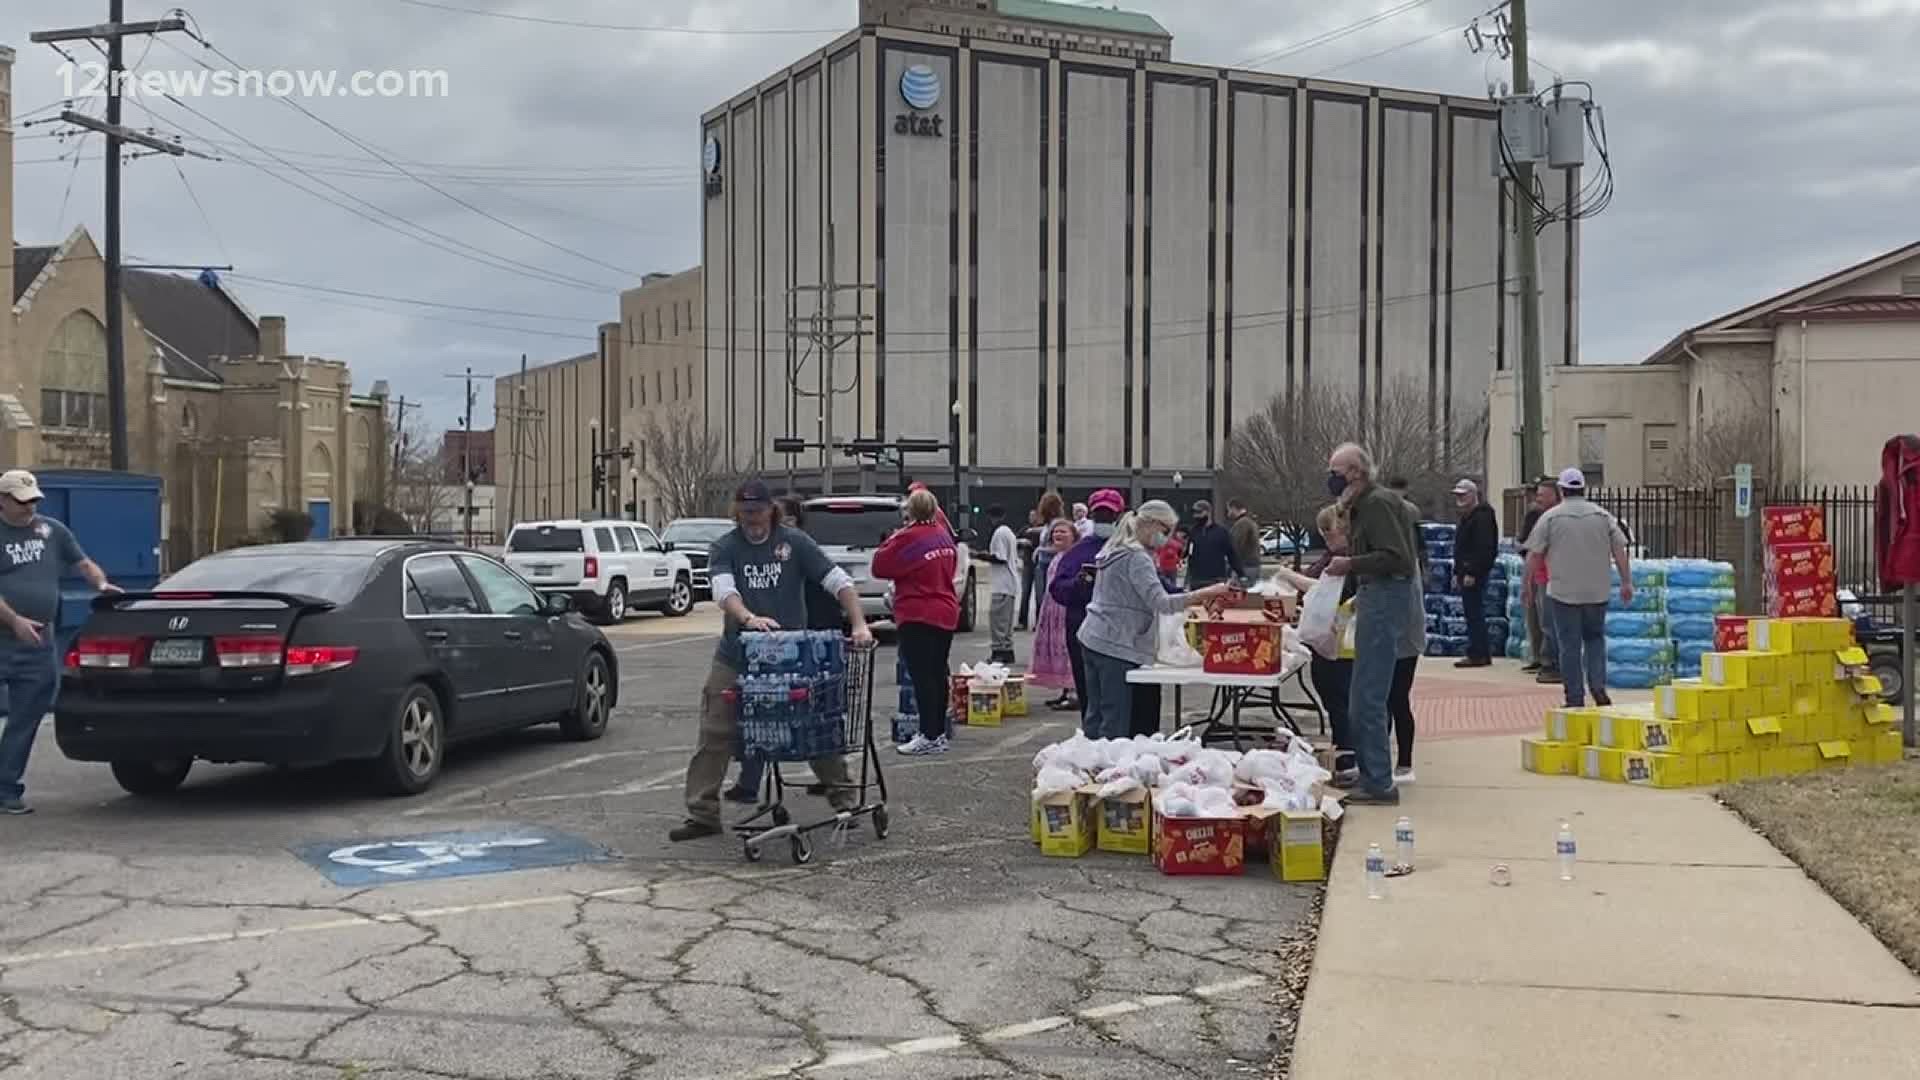 The Cajun Navy arrived in Beaumont Sunday afternoon to lend a helping hand. Volunteers spent the day distributing water at St. Mark's Episcopal Church.